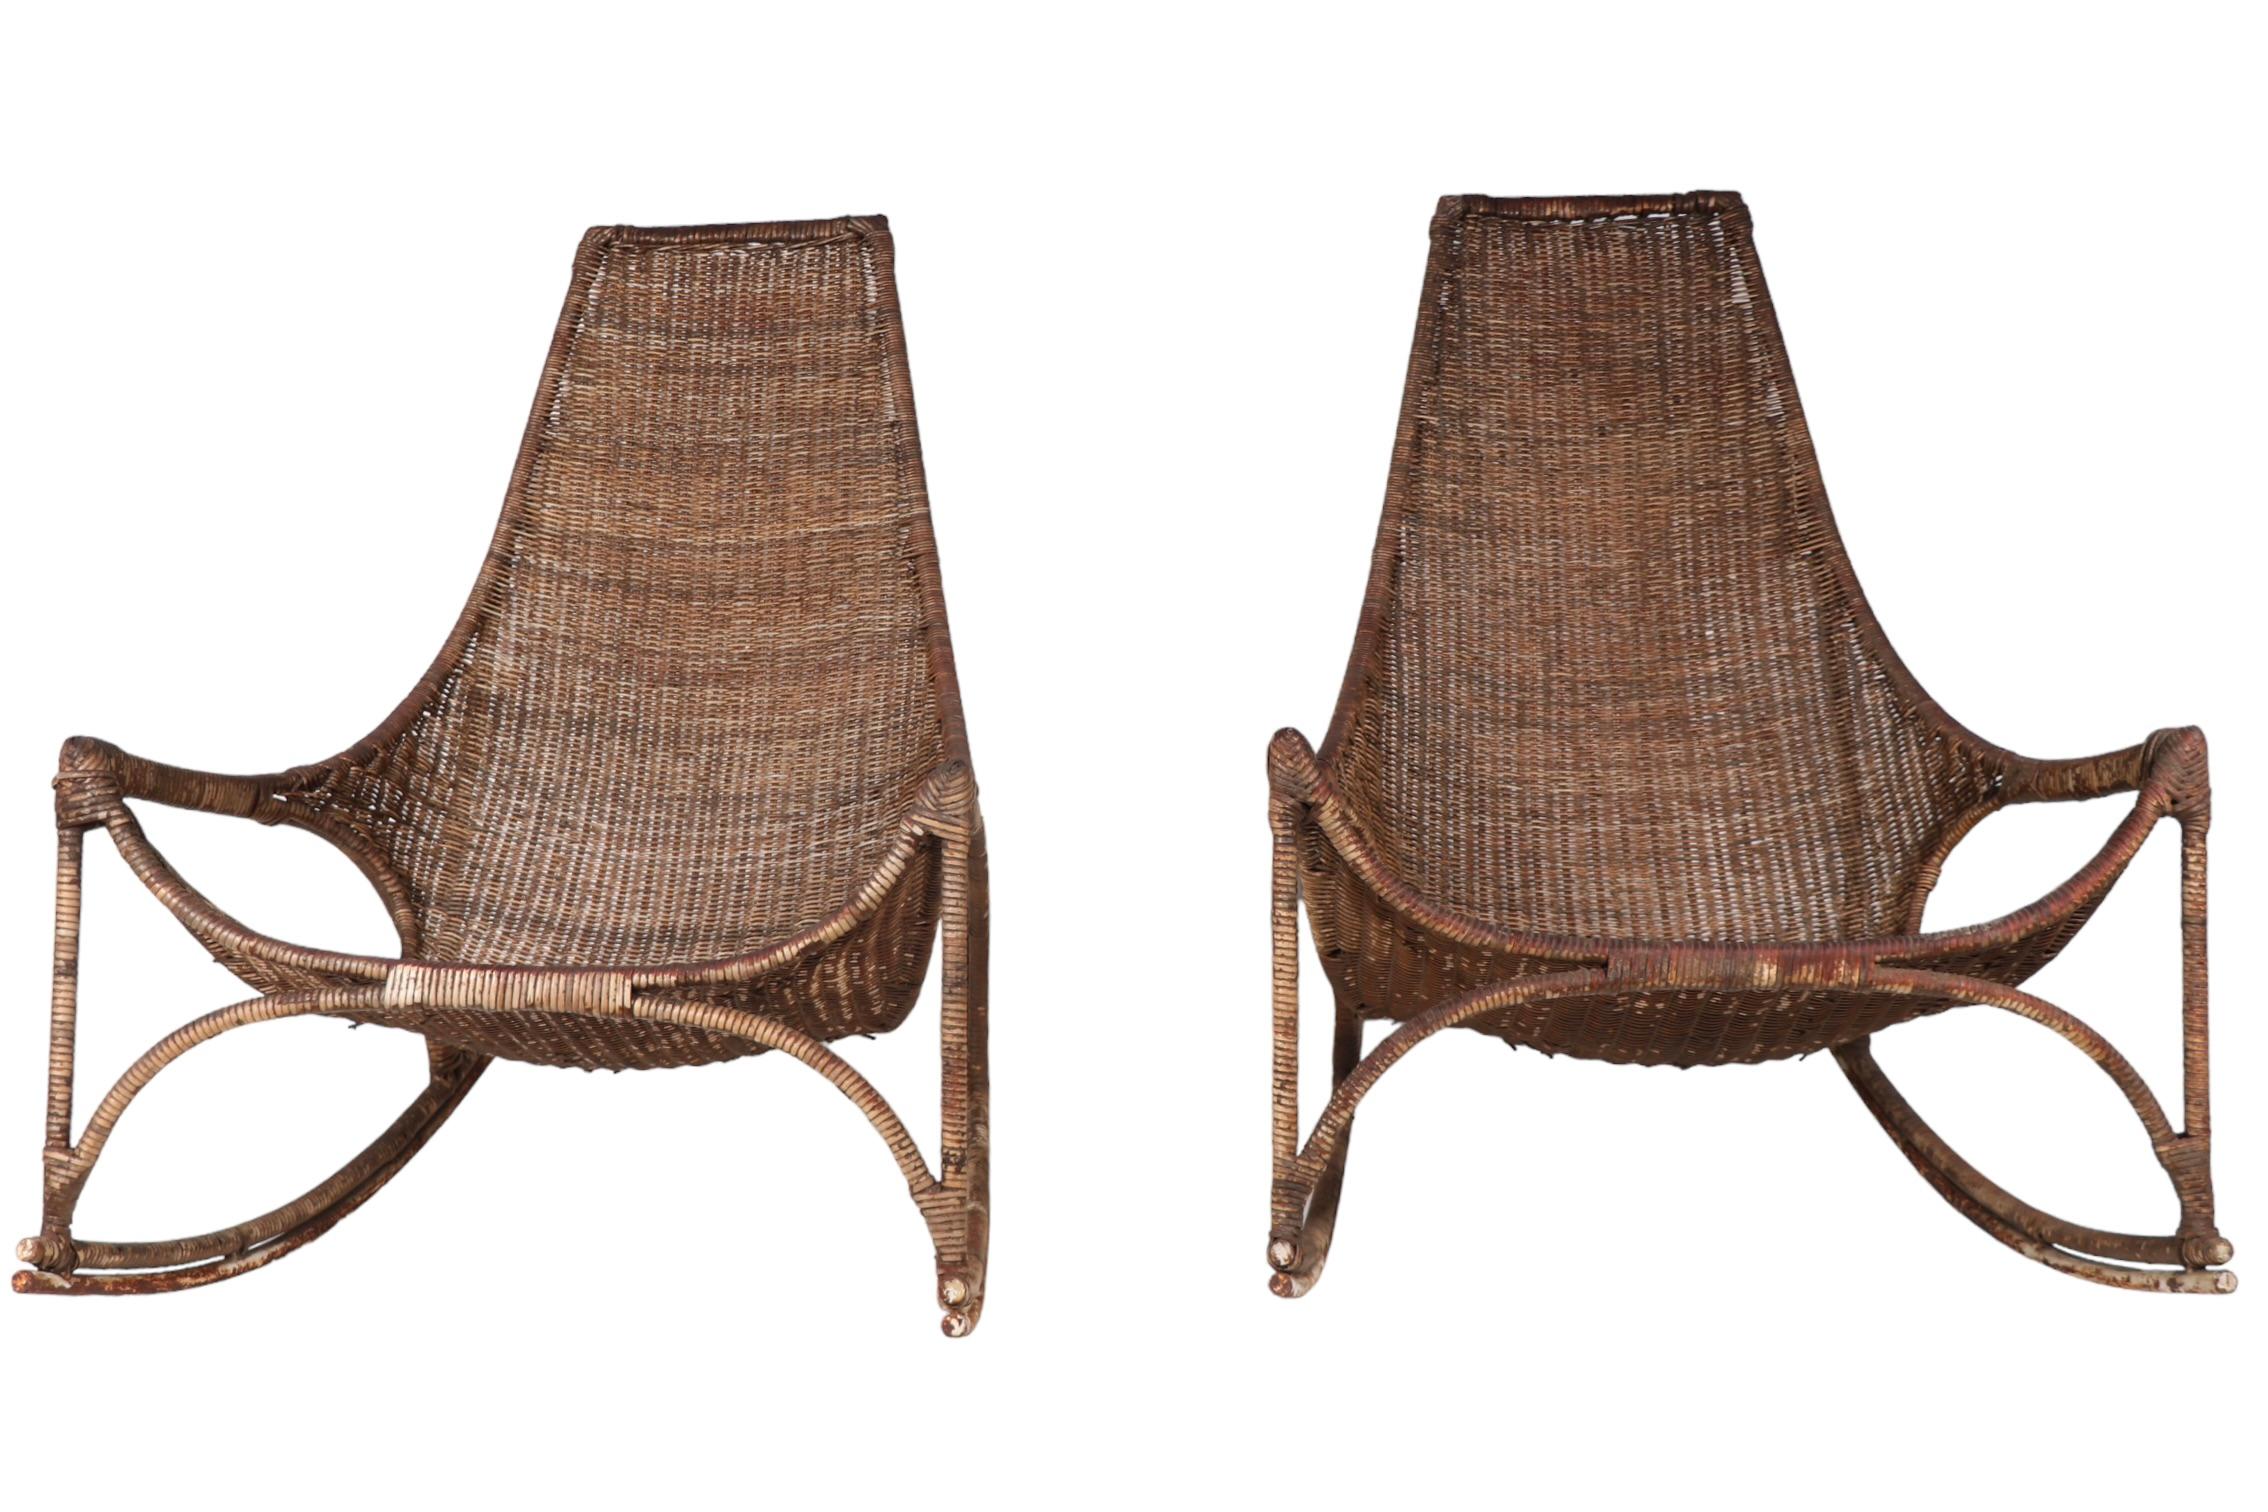 20th Century Pr. Wicker Rocking Chairs by Francis Mair c 1950/1960's For Sale